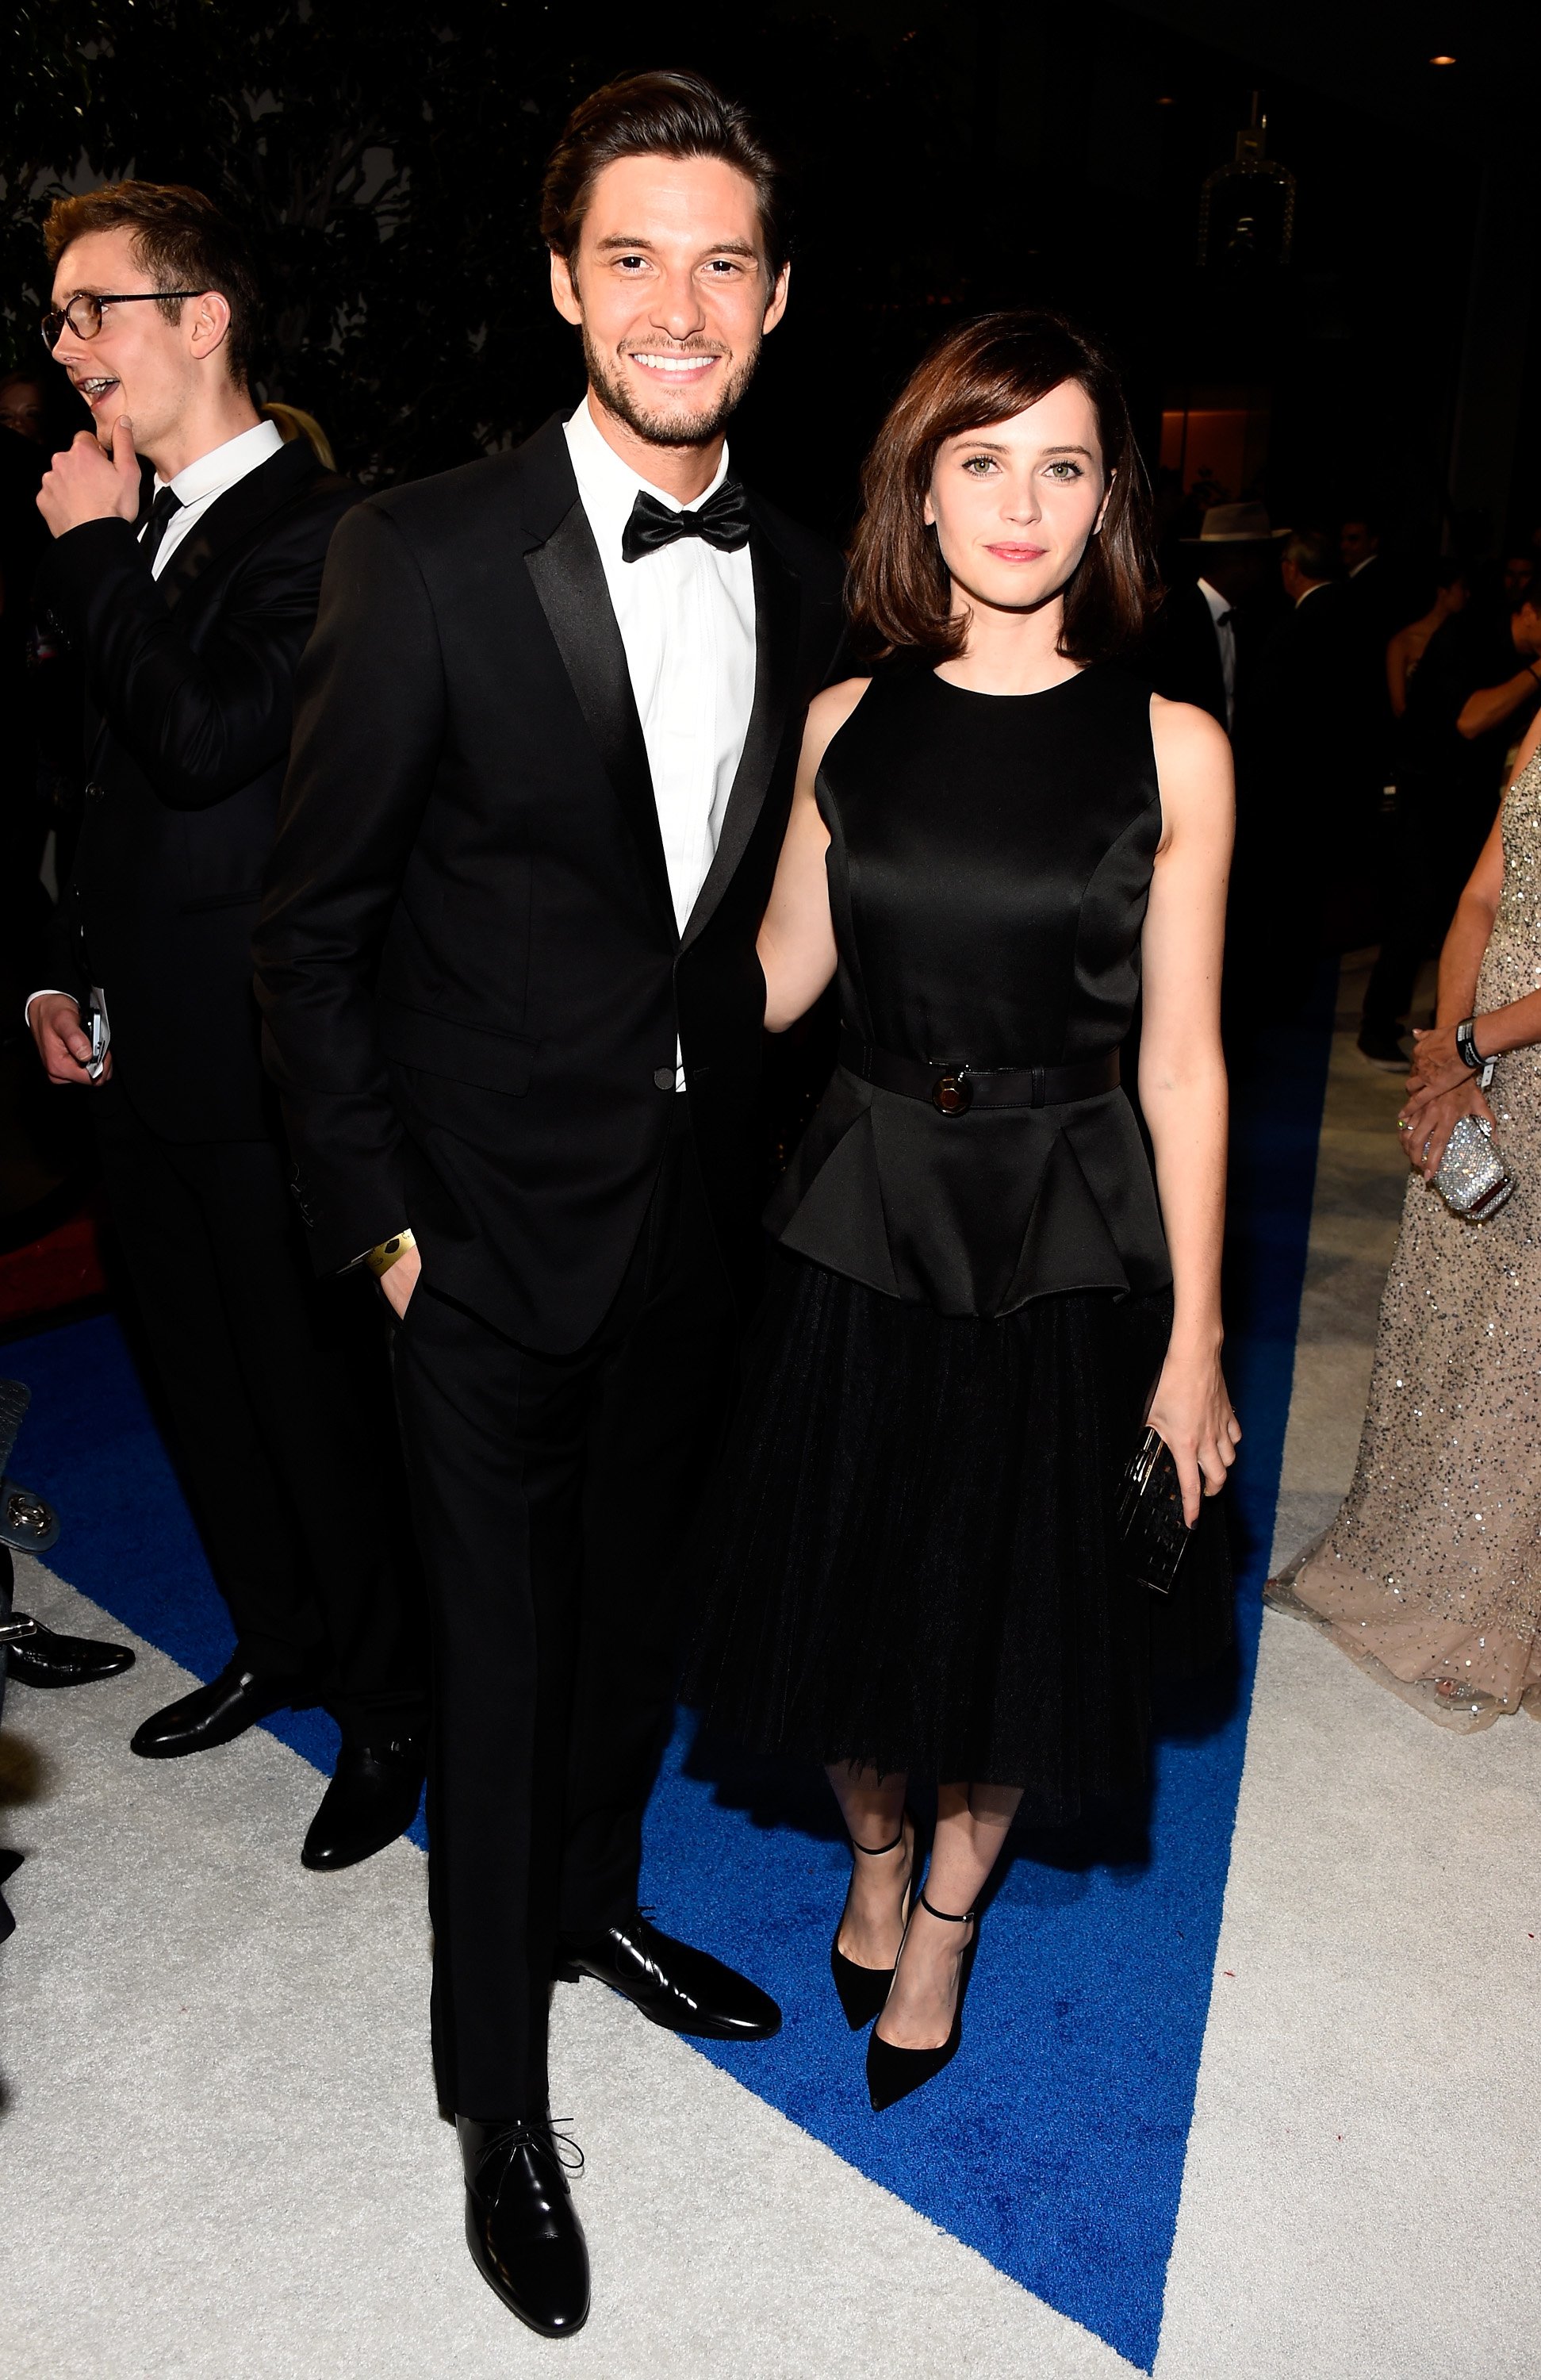 Ben Barnes and Felicity Jones pose while being photographed at the BAFTA Los Angeles Jaguar Britannia Awards in Beverly Hills | Source: Getty Images